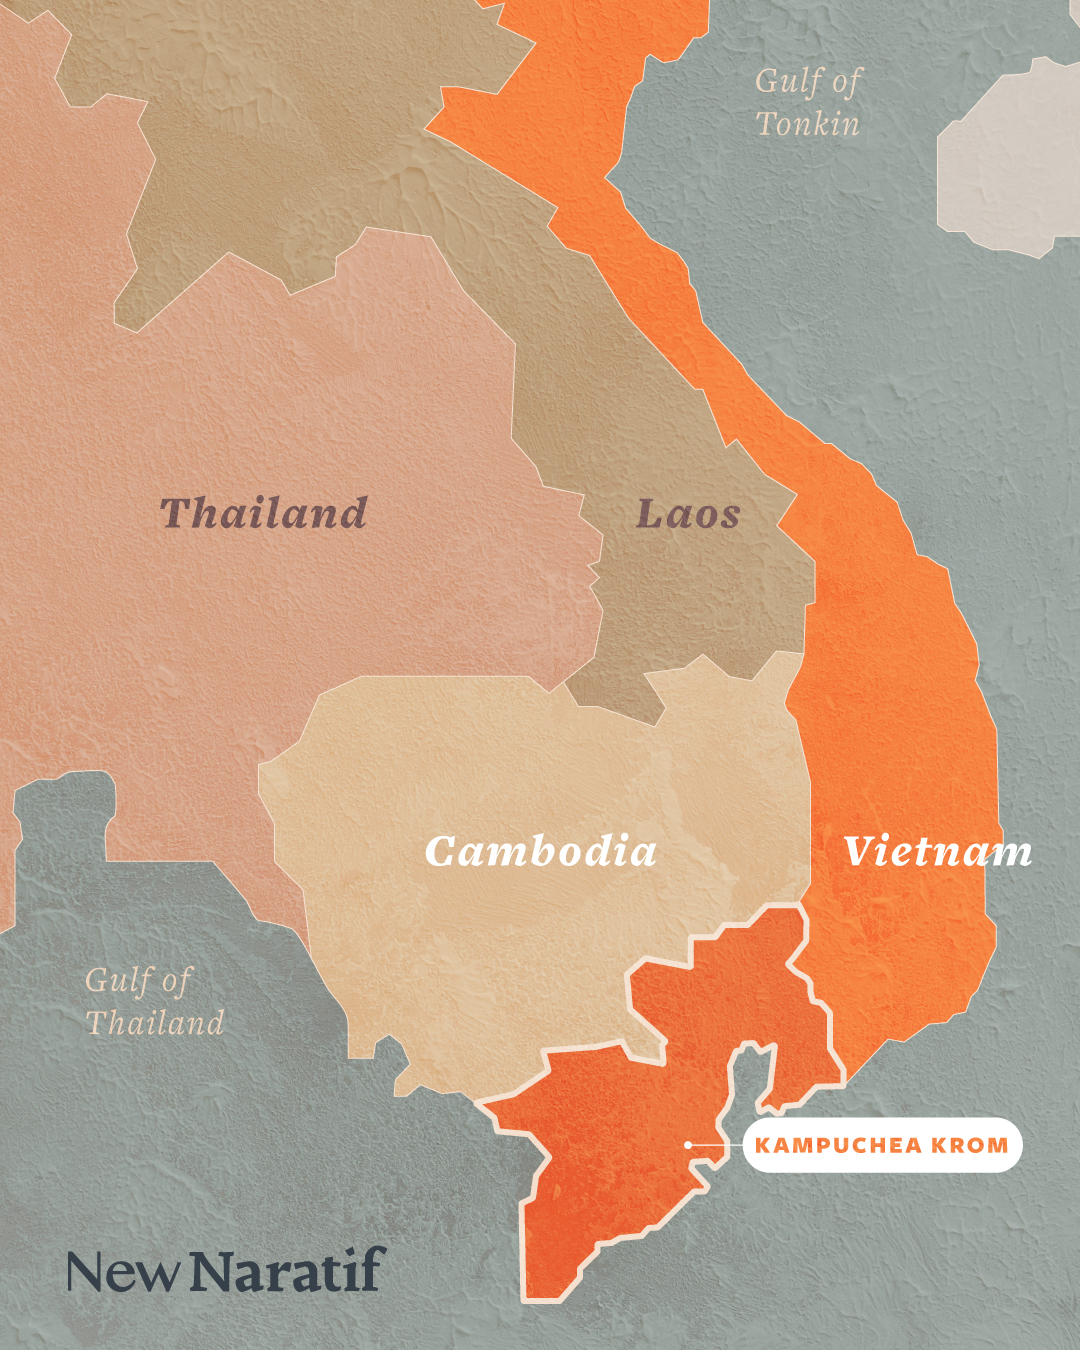 Map of Cambodia, Vietnam, Thailand and Laos showing the historical borders of Kampuchea Krom in modern day southern Vietnam